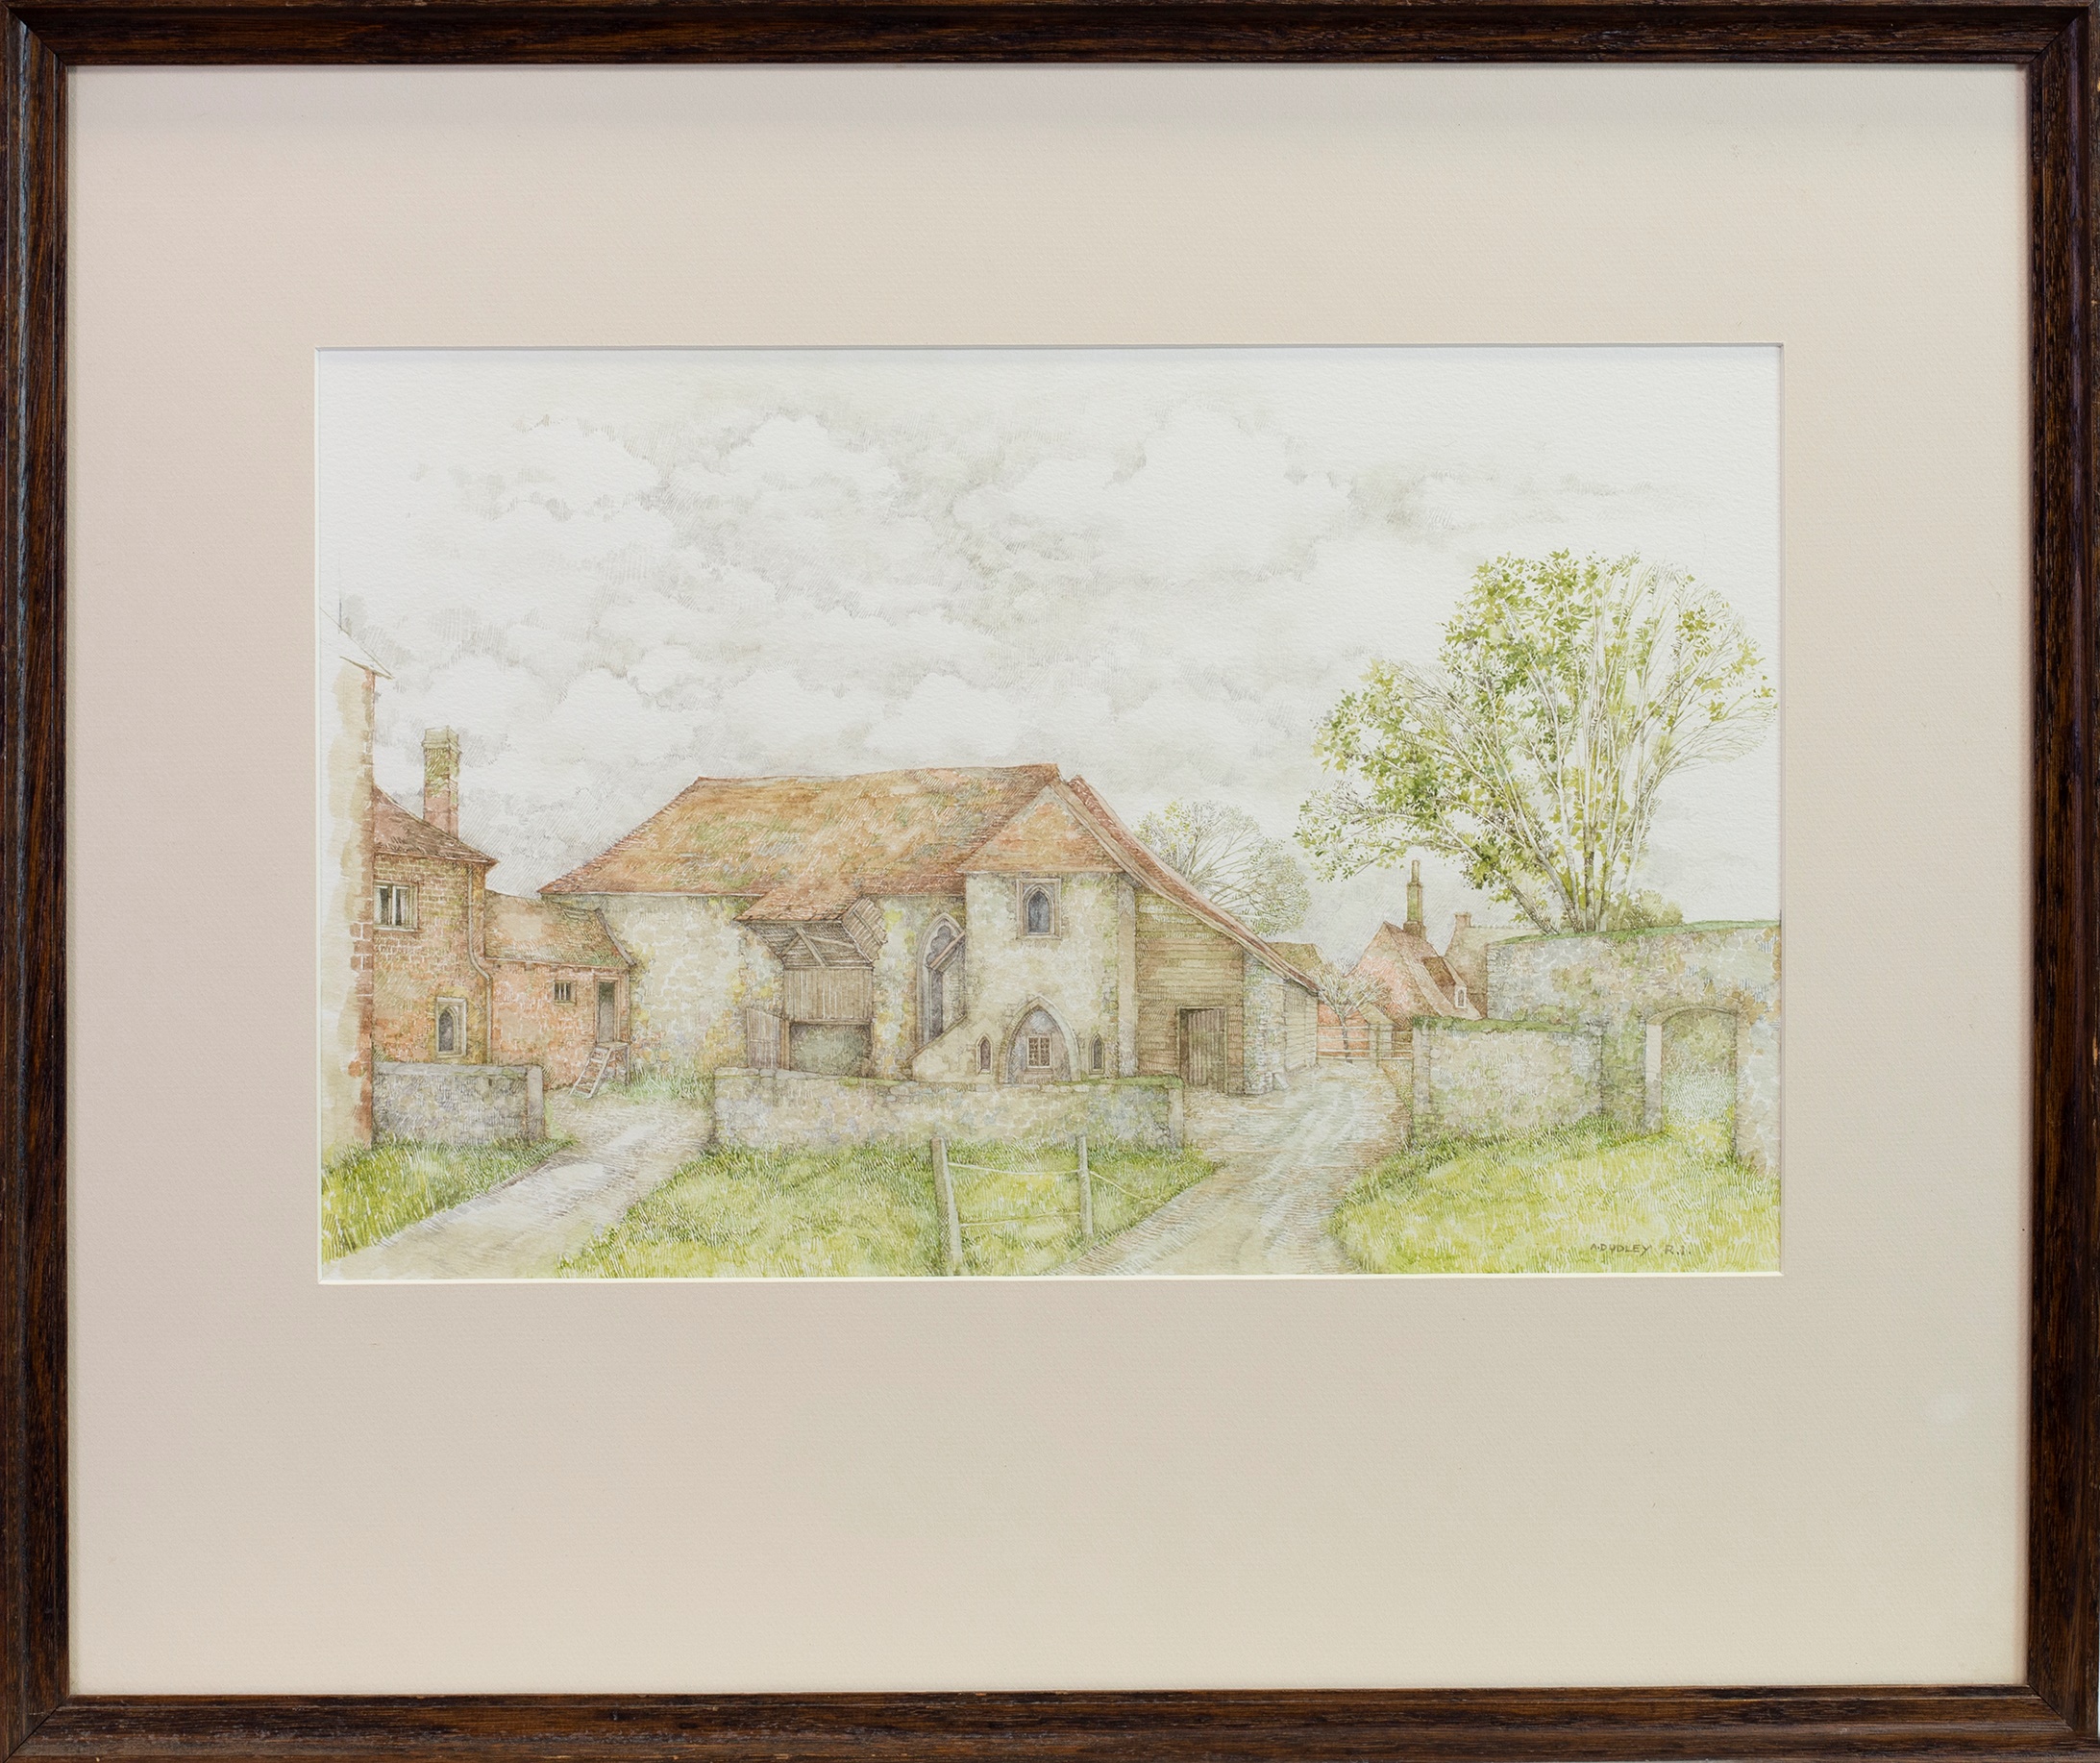 OLD FARM HOUSE, KENT, A WATERCOLOUR BY ANNA DUDLEY NEILL